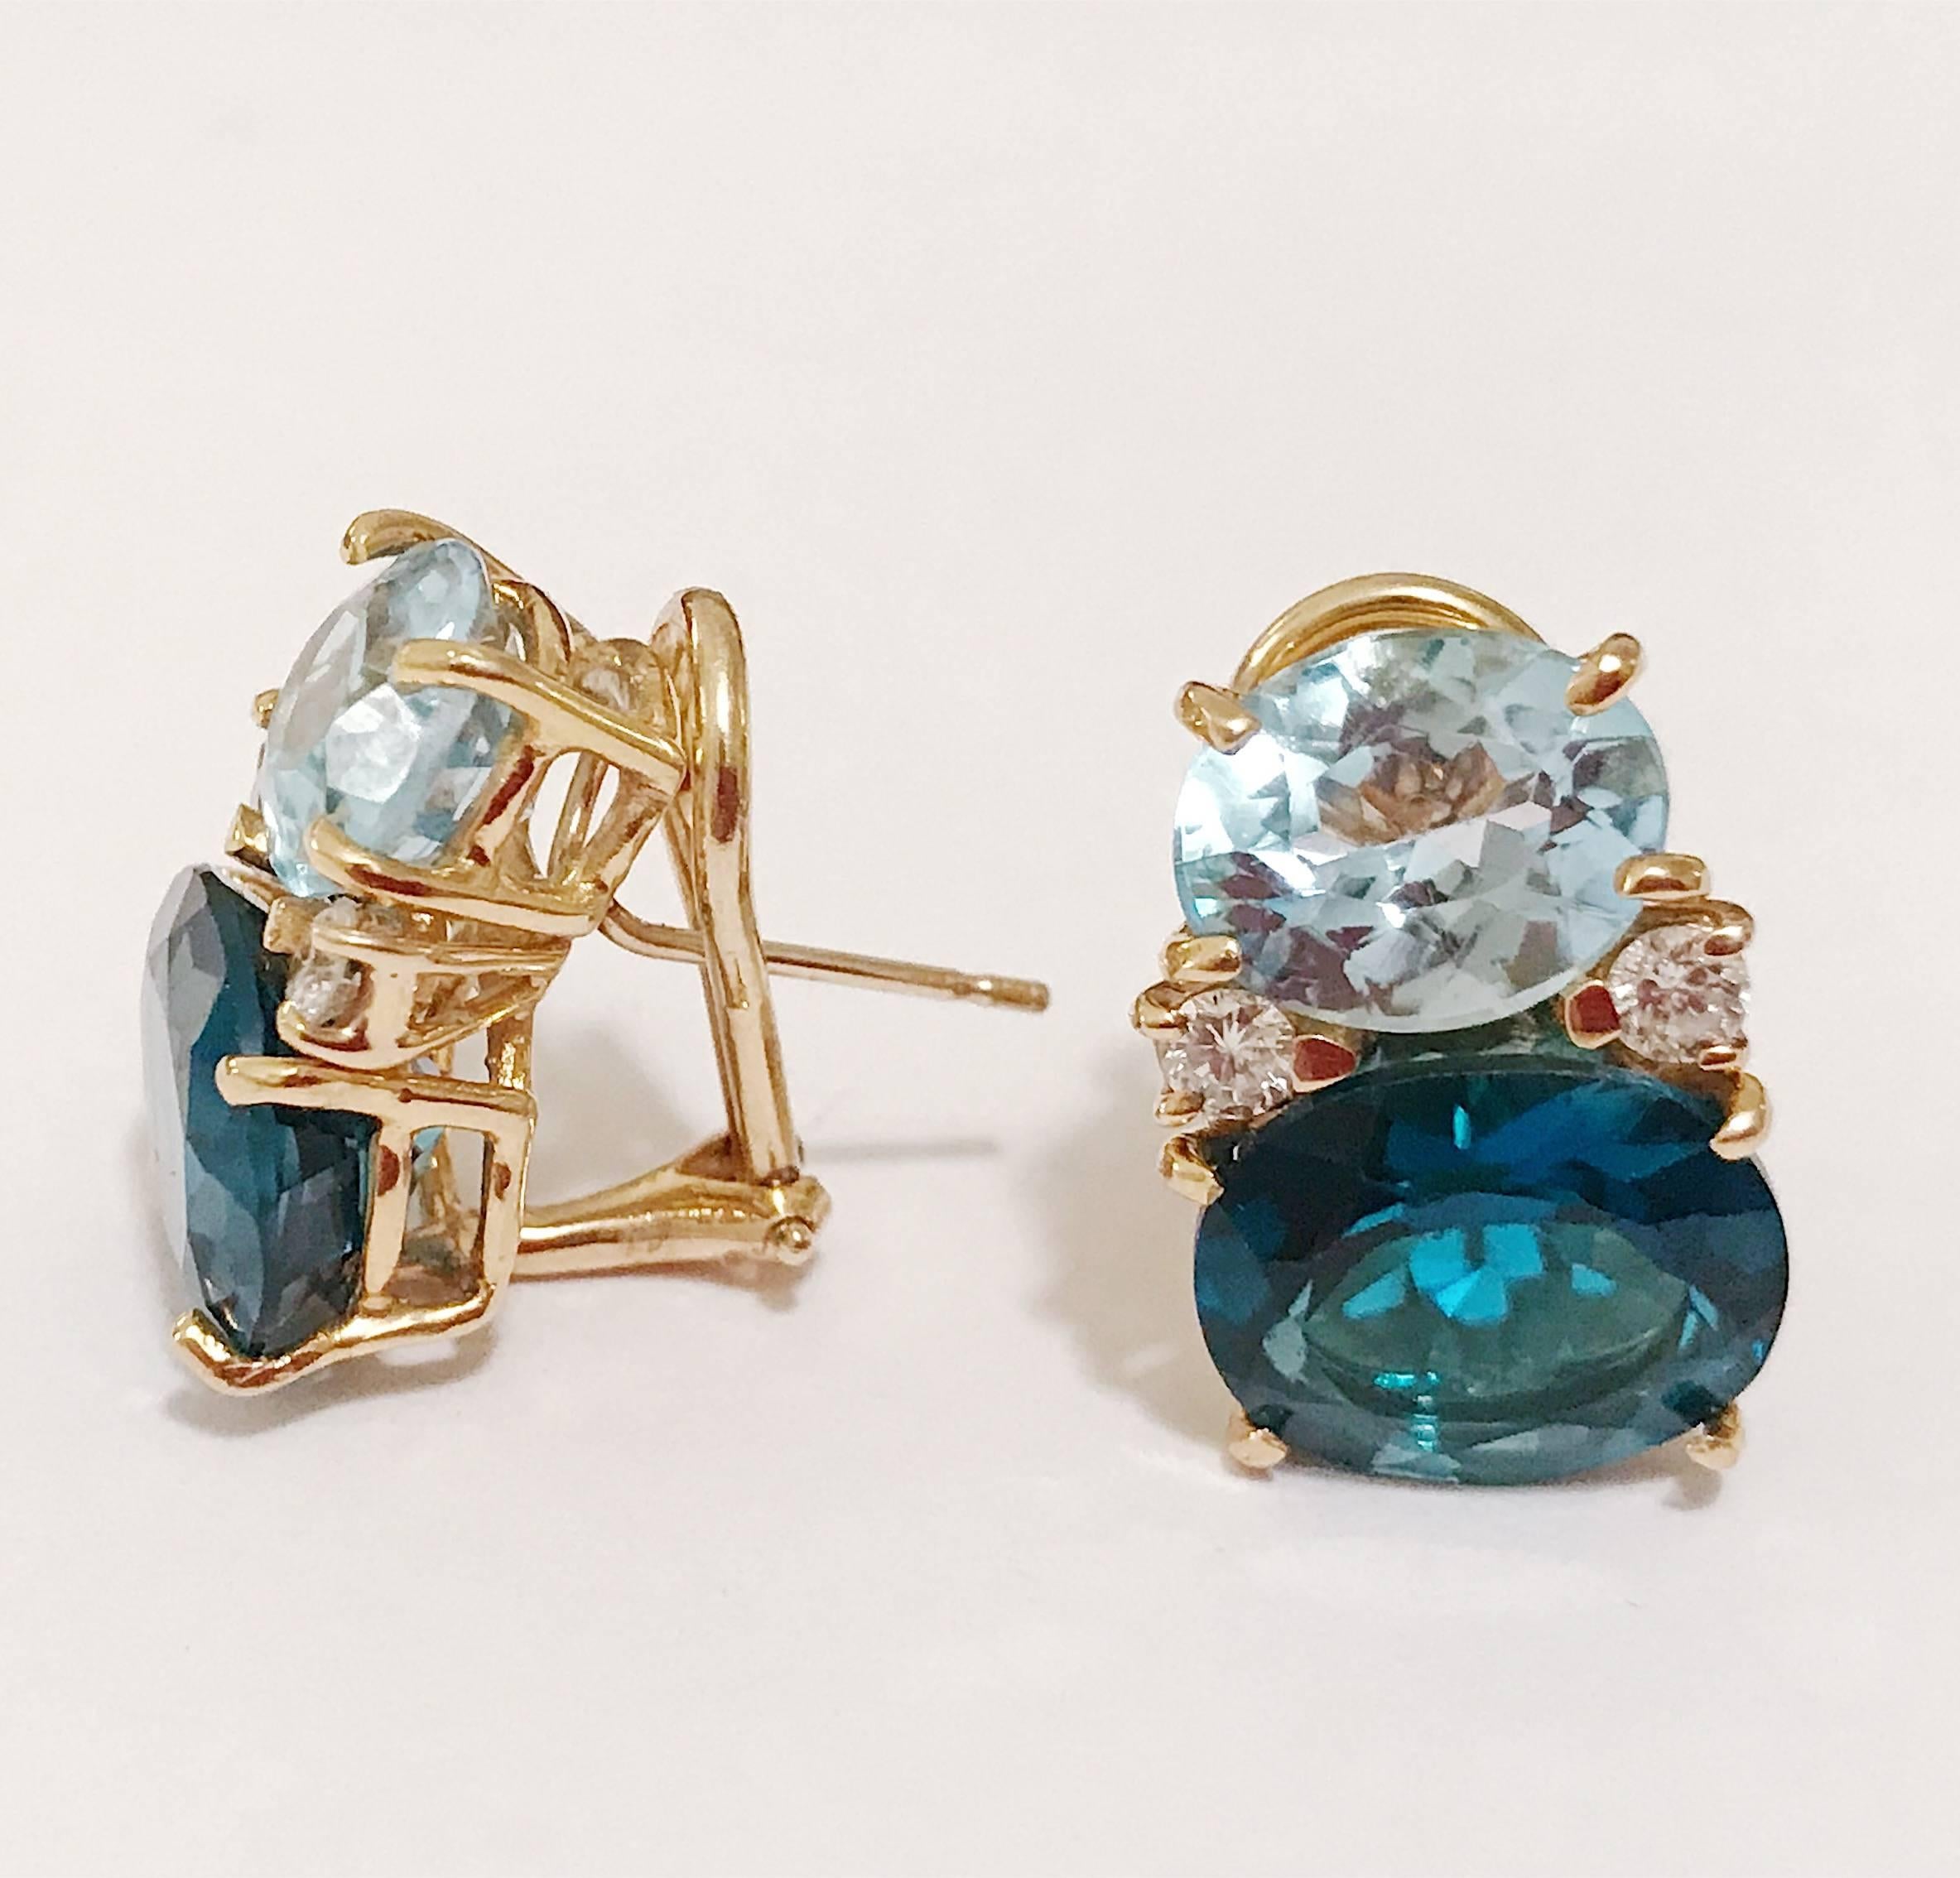 Medium 18kt yellow gold GUM DROP™ earrings with faceted Pale Blue Topaz (approximately 2.5 cts each), faceted London Blue Topaz (approximately 5 cts each), and 4 diamonds weighing ~0.40 cts. 

Specifications: Height: 3/4